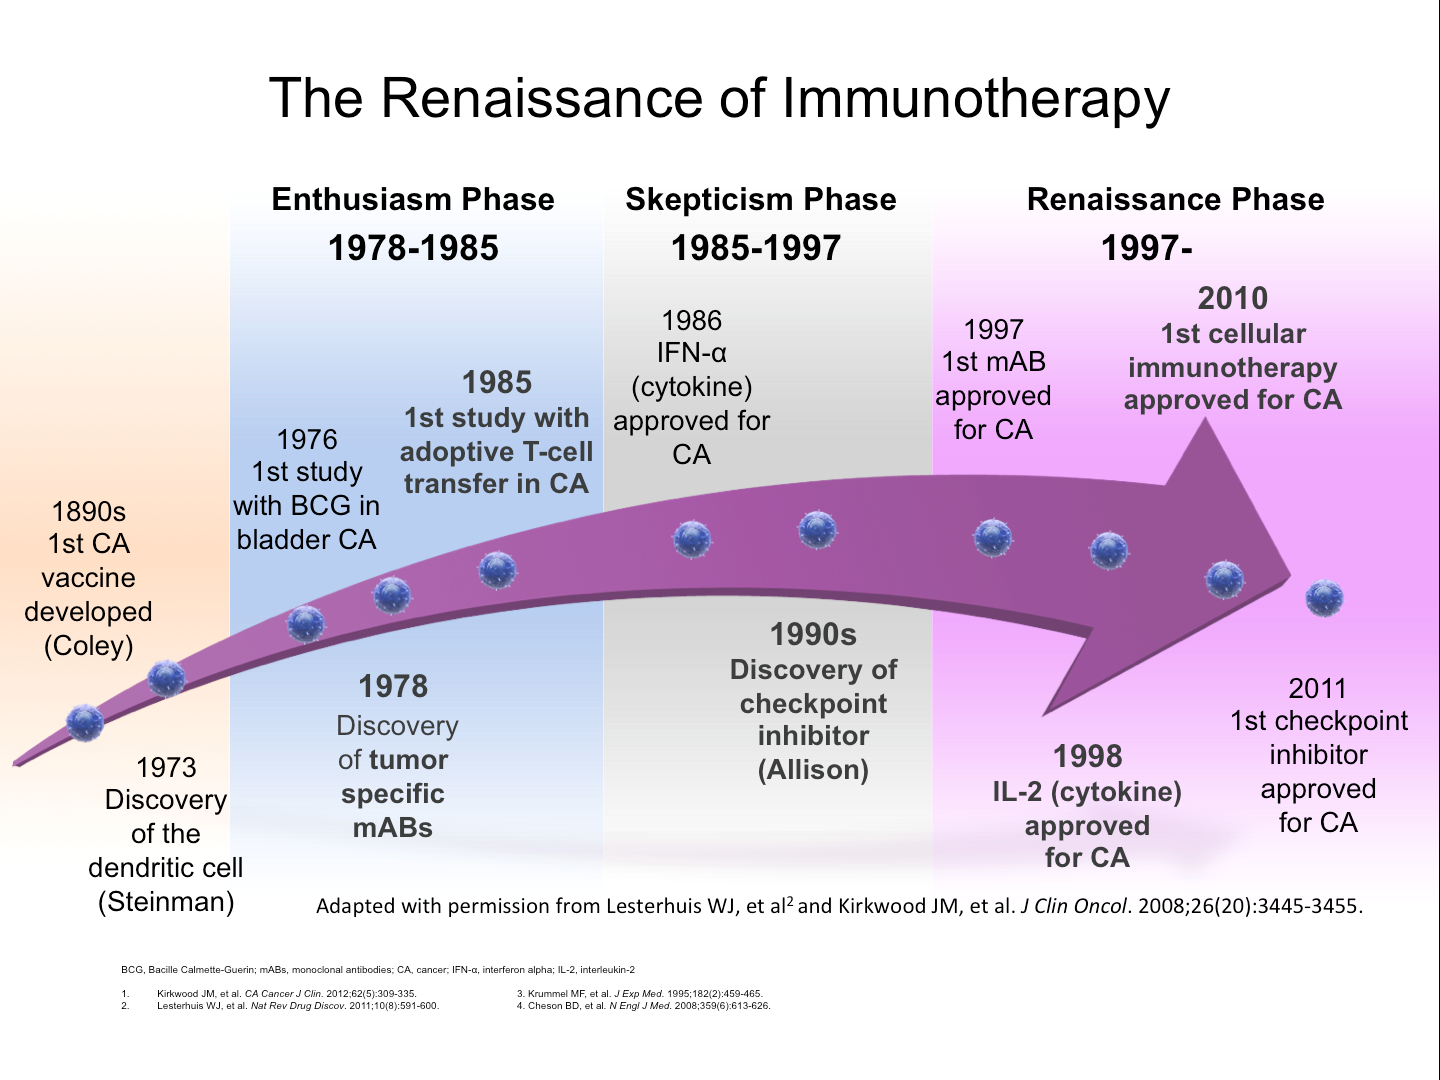 Renaissance of Immunotherapy since the 1890s